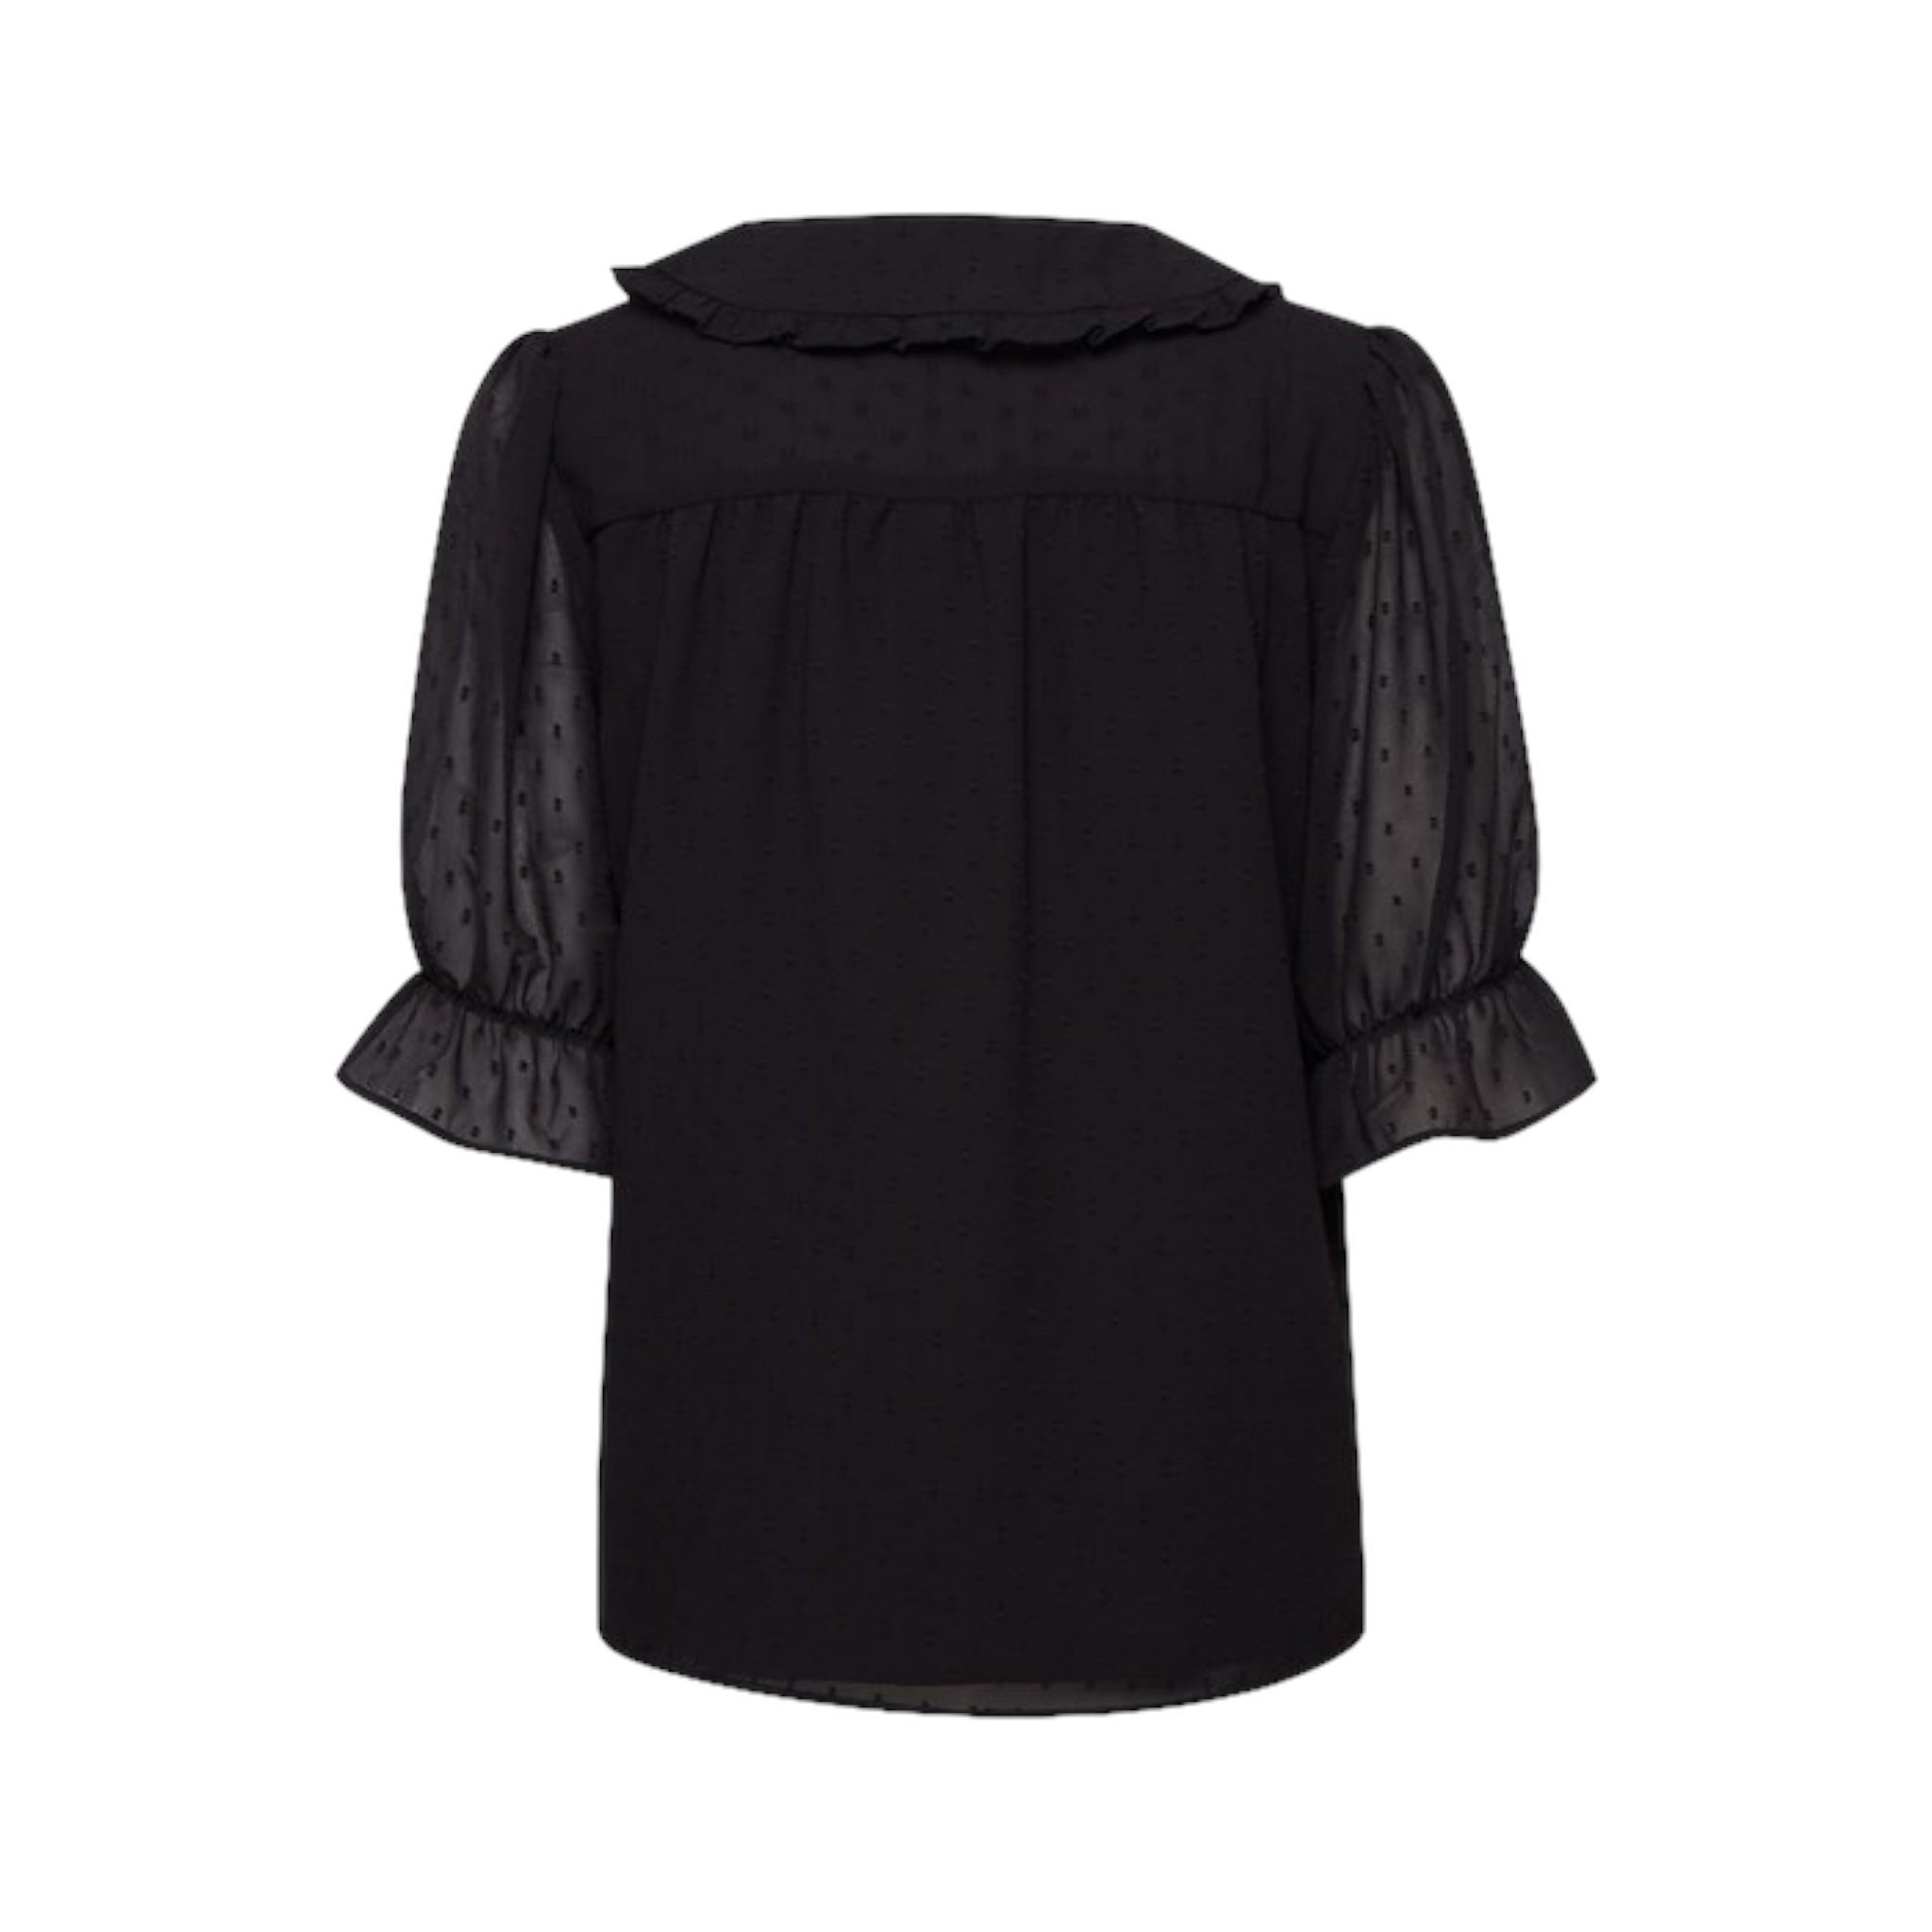 B-Young-Isigne-Blouse-Black-Product-Image-Back-View